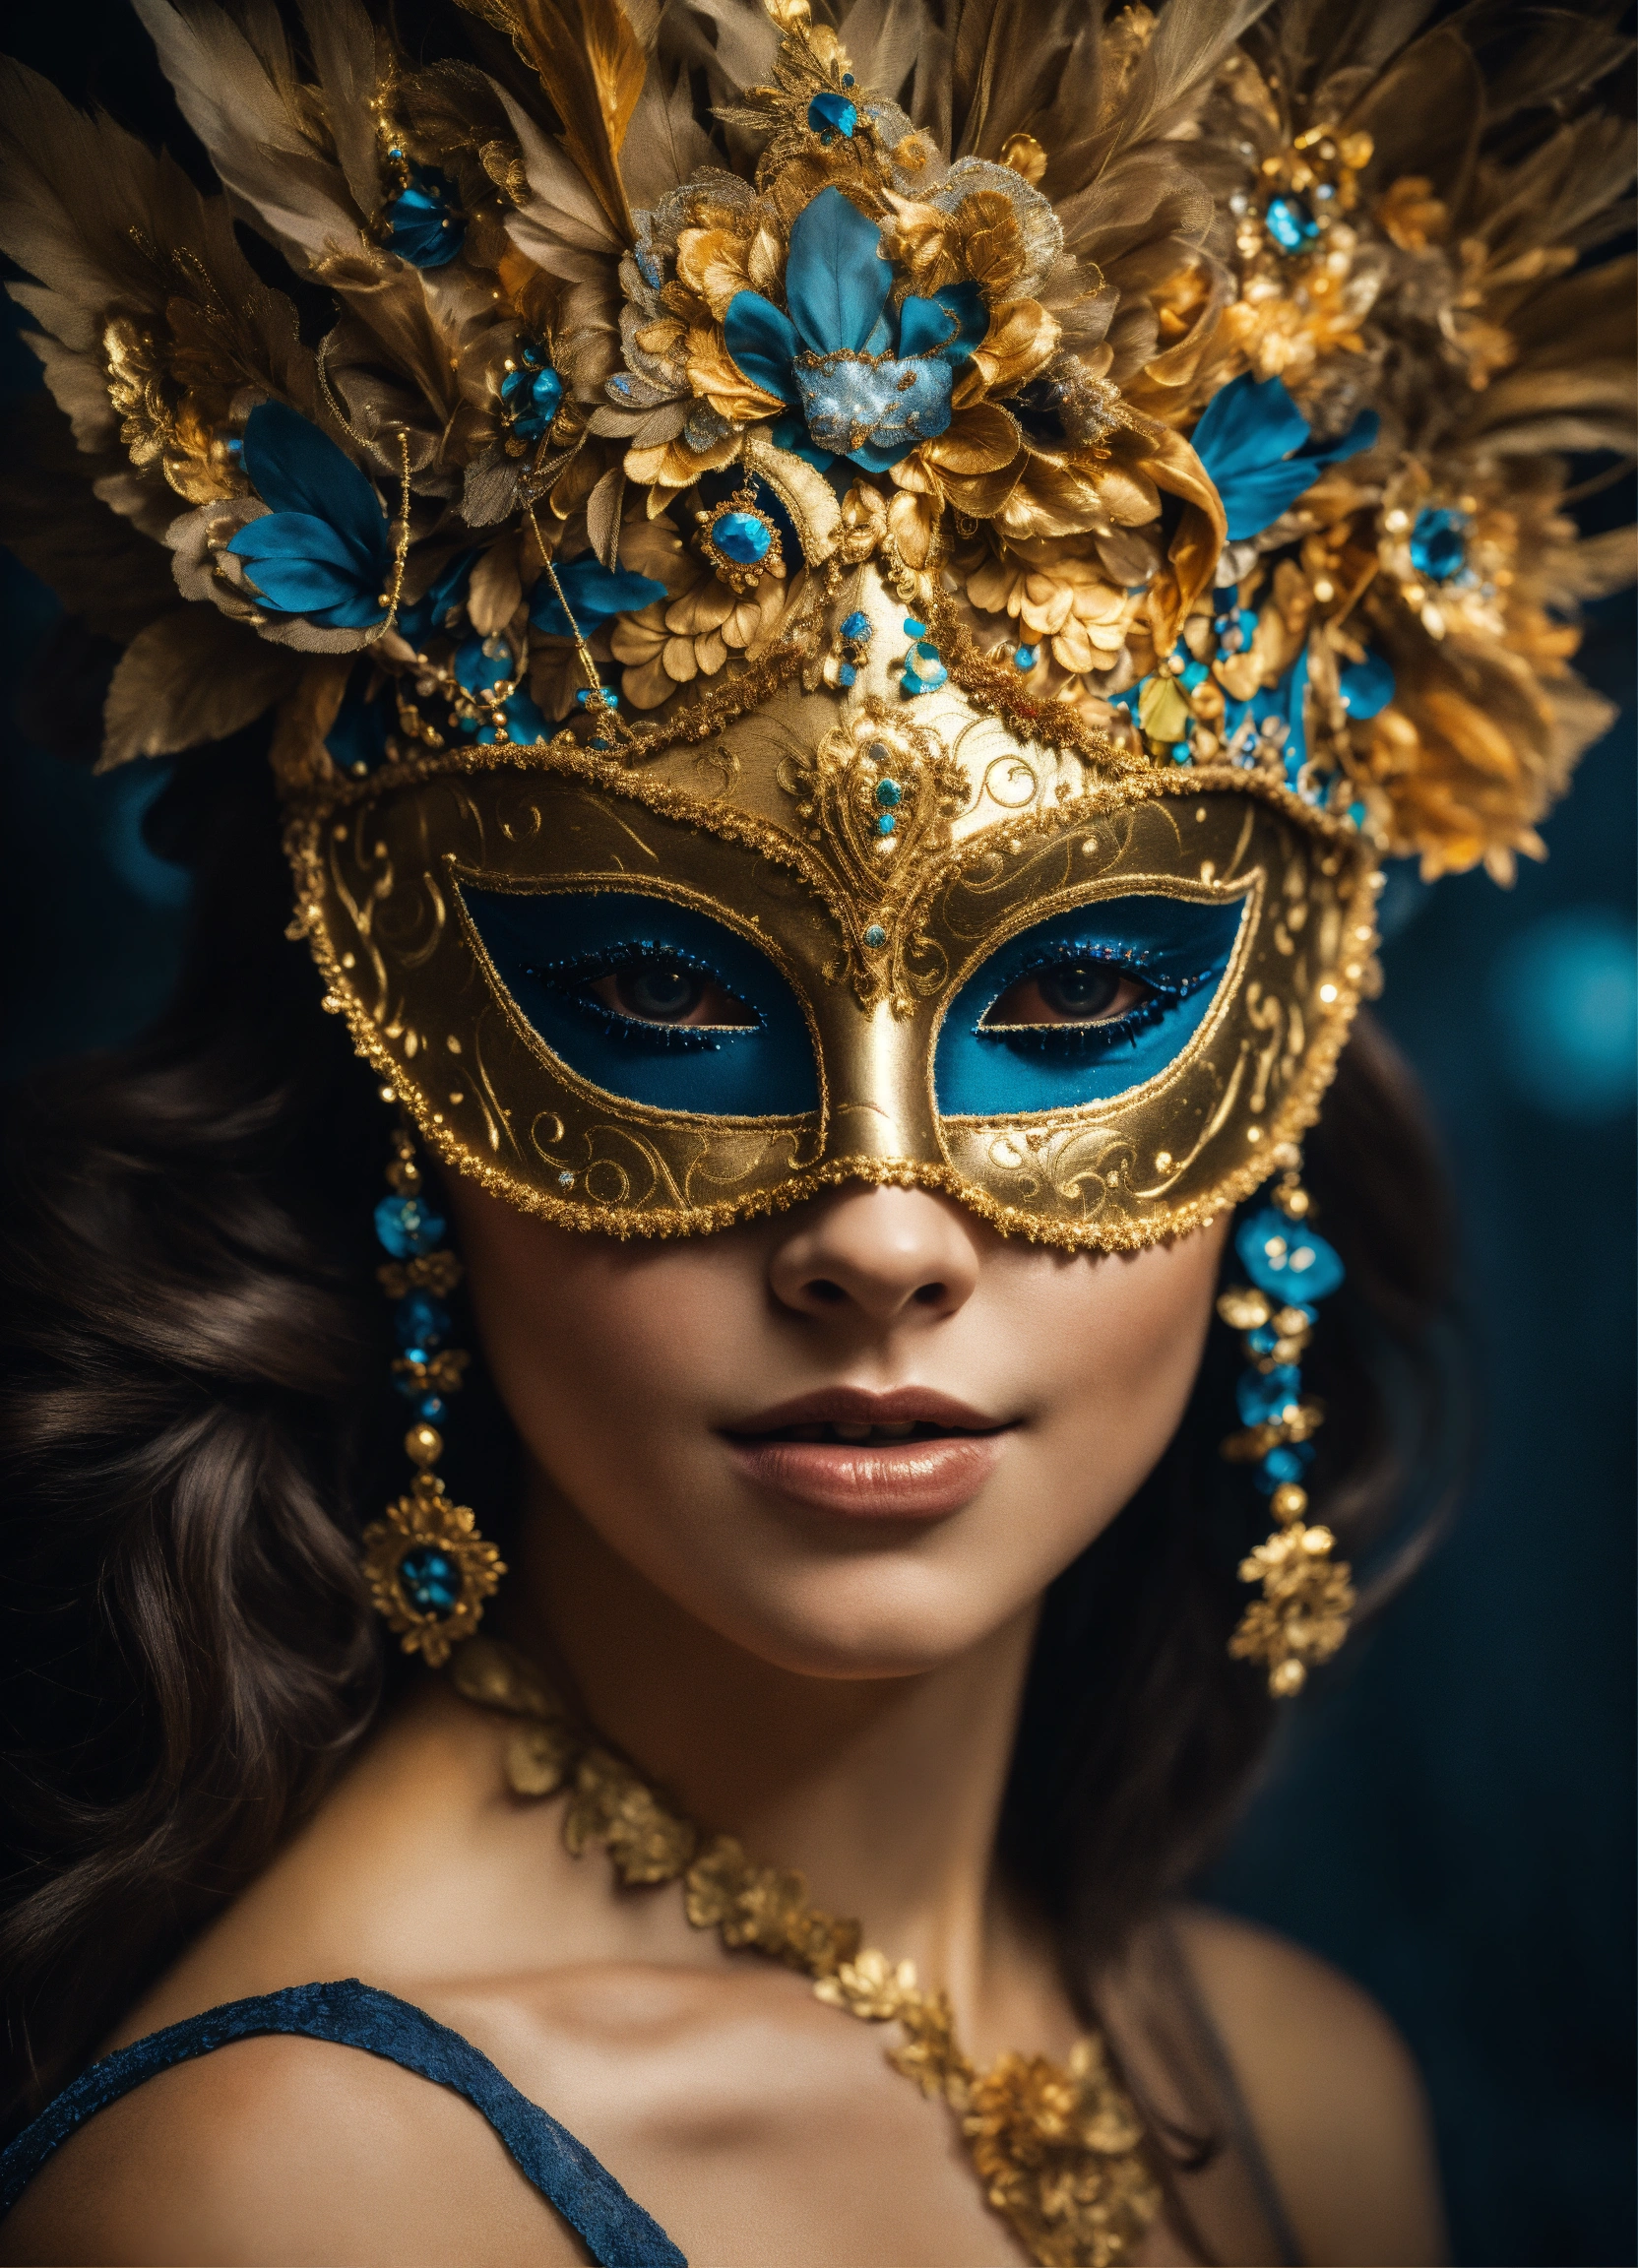 Lexica - Portrait of a woman in a richly decorated masquerade mask. the ...